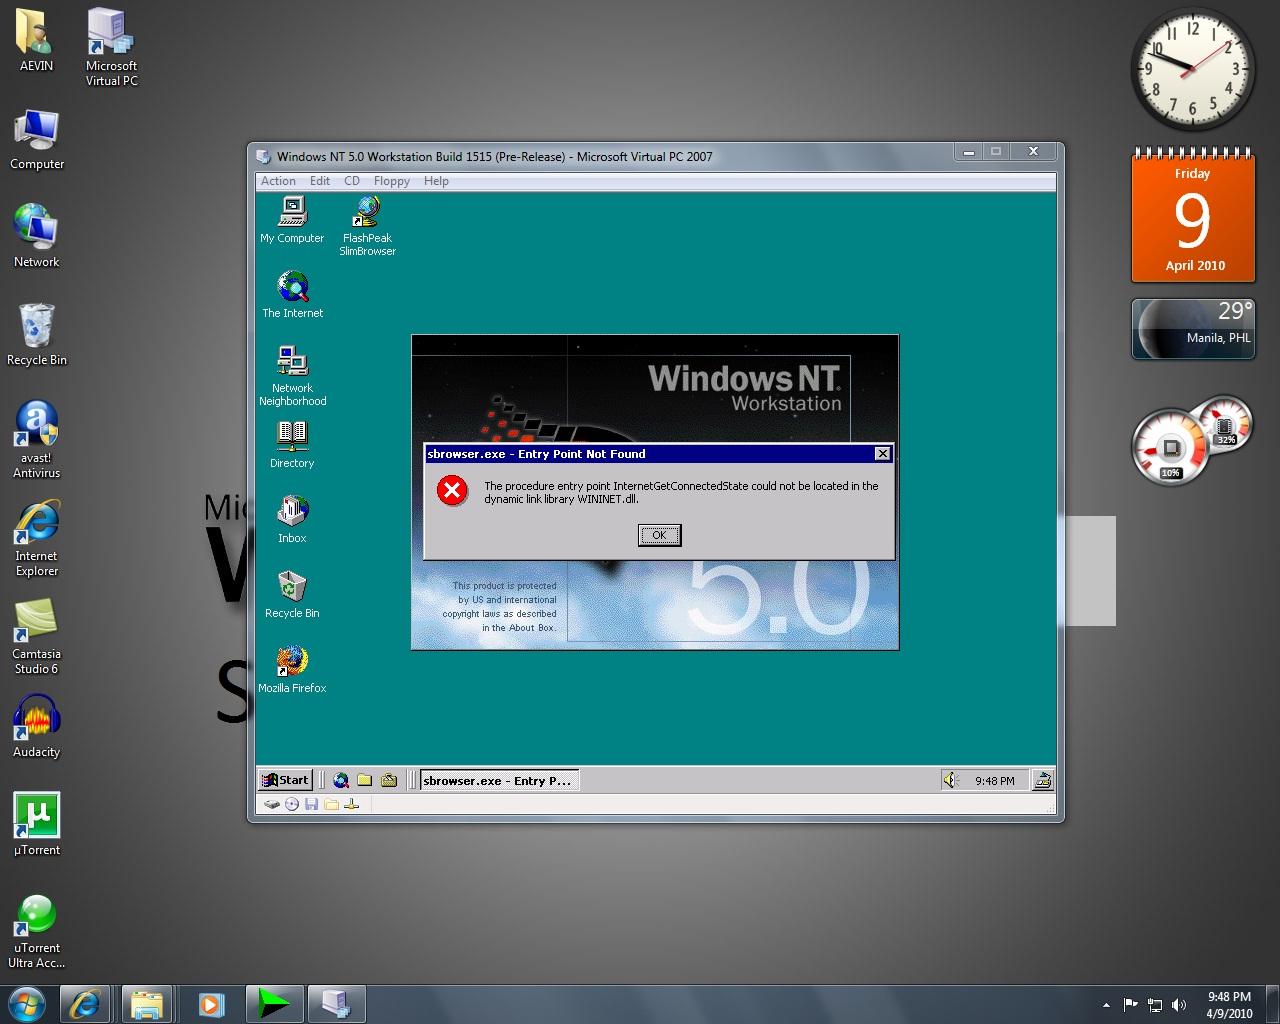 Windows NT 5.0 Logo - View topic - Windows NT 5.0 Build 1515 Browser Problem - BetaArchive